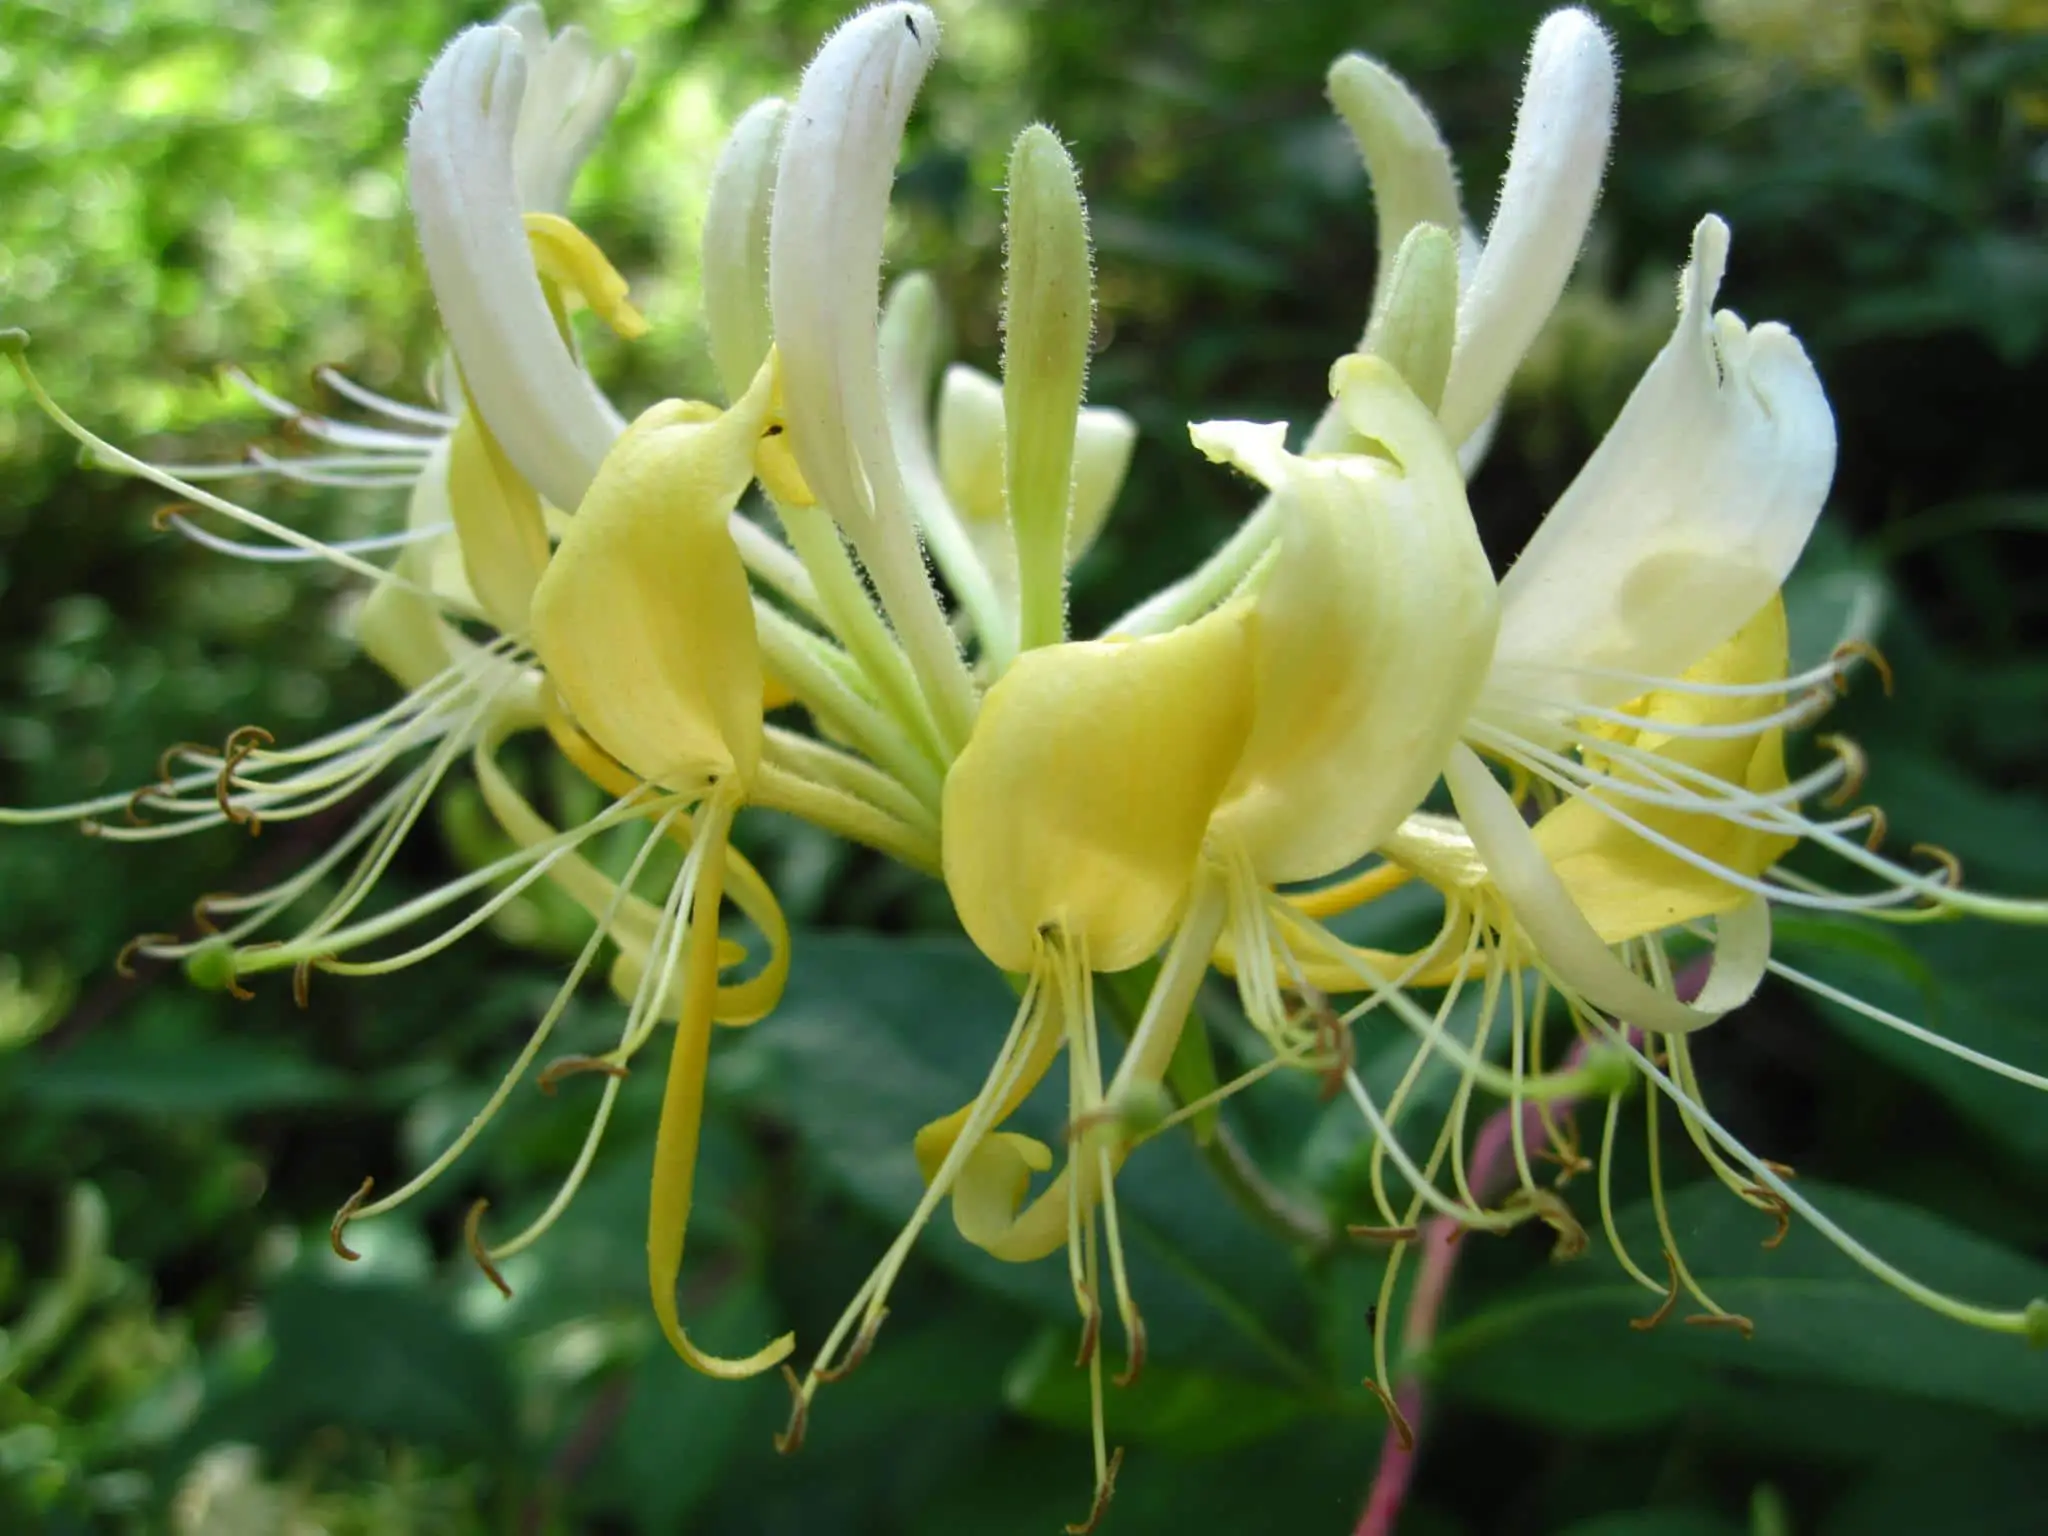 Lonicera periclymenum, all about the forest honeysuckle